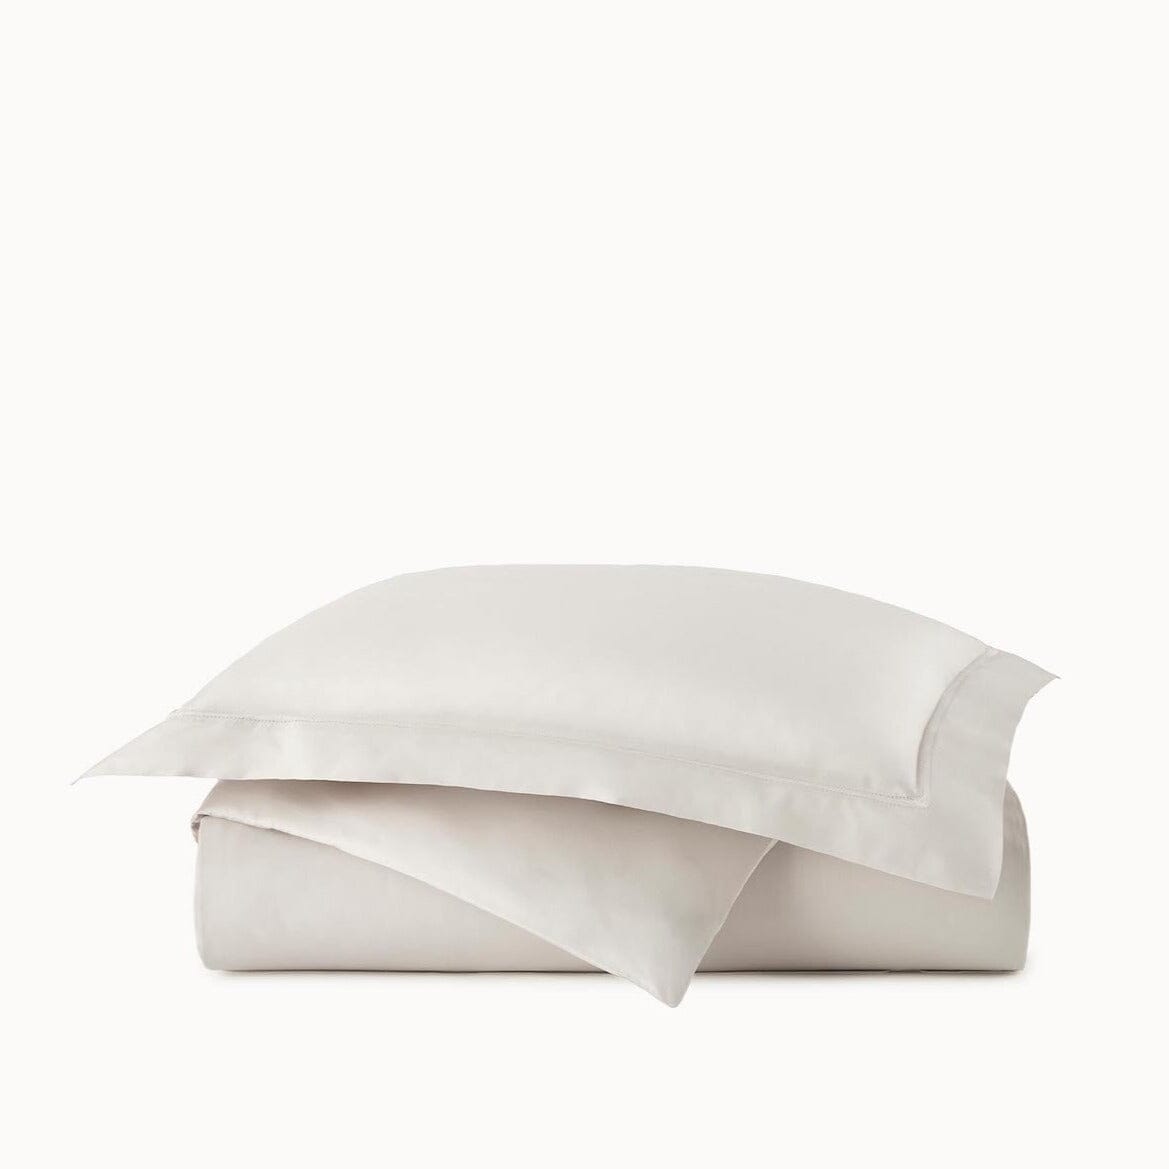 Duvet Cover Folded with Pillow Sham on Top - Peacock Alley Percale Cotton Bedding in Lyric Platinum